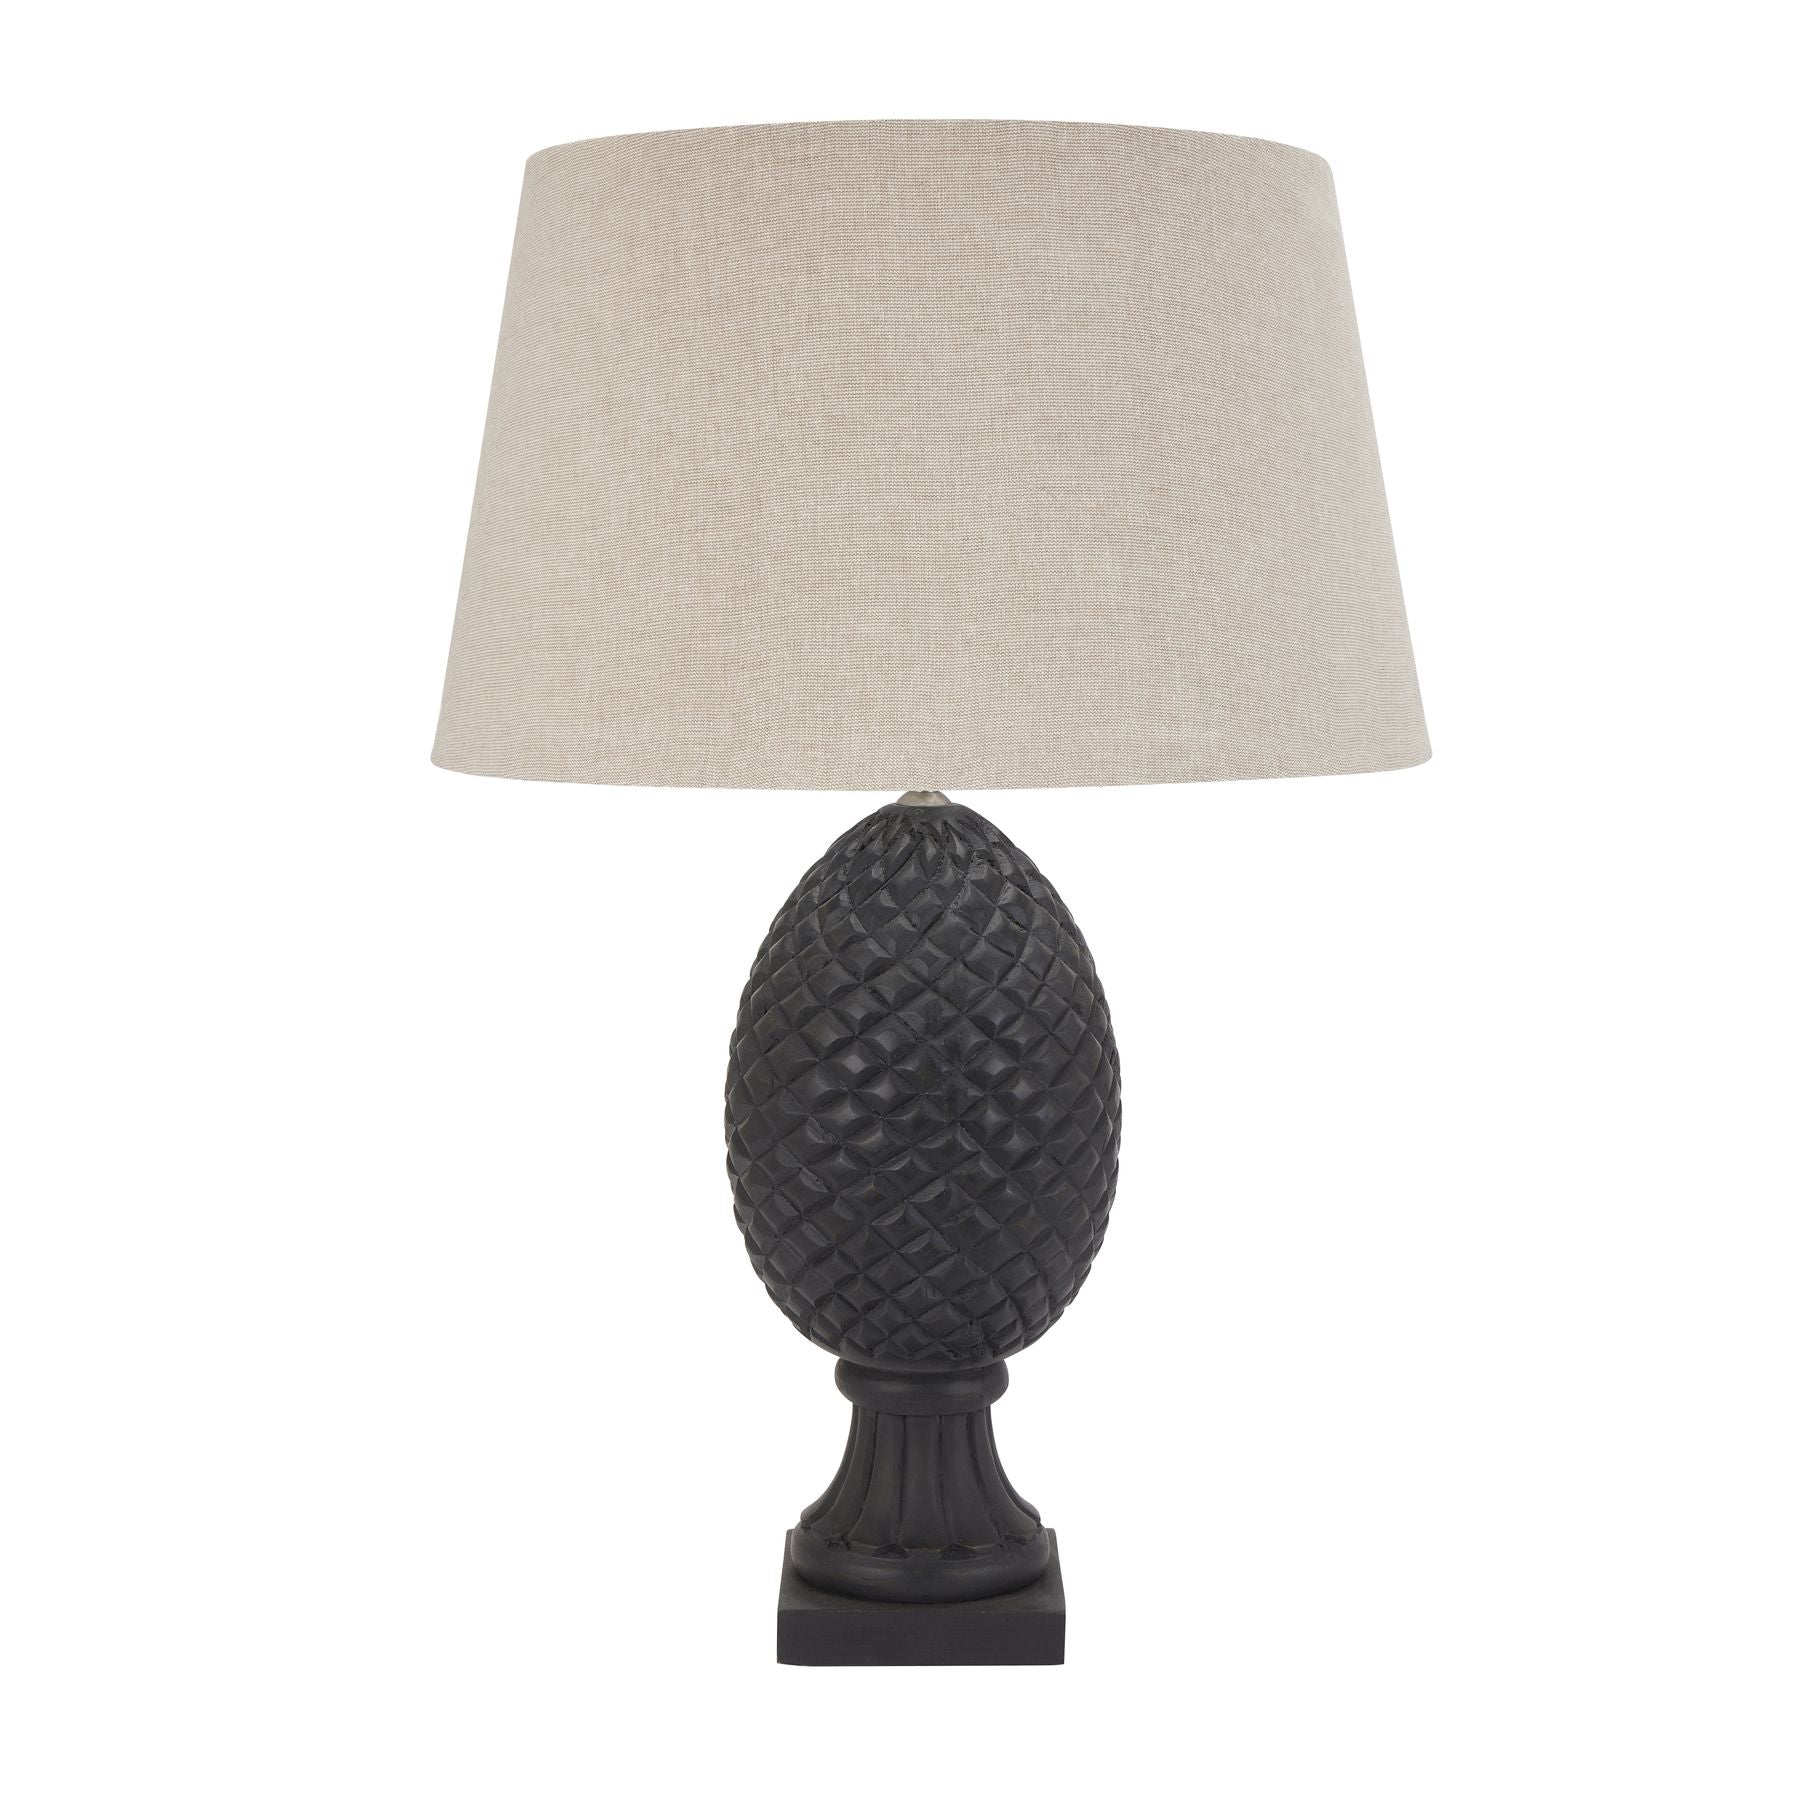 View Delaney Grey Pineapple Lamp With Linen Shade information